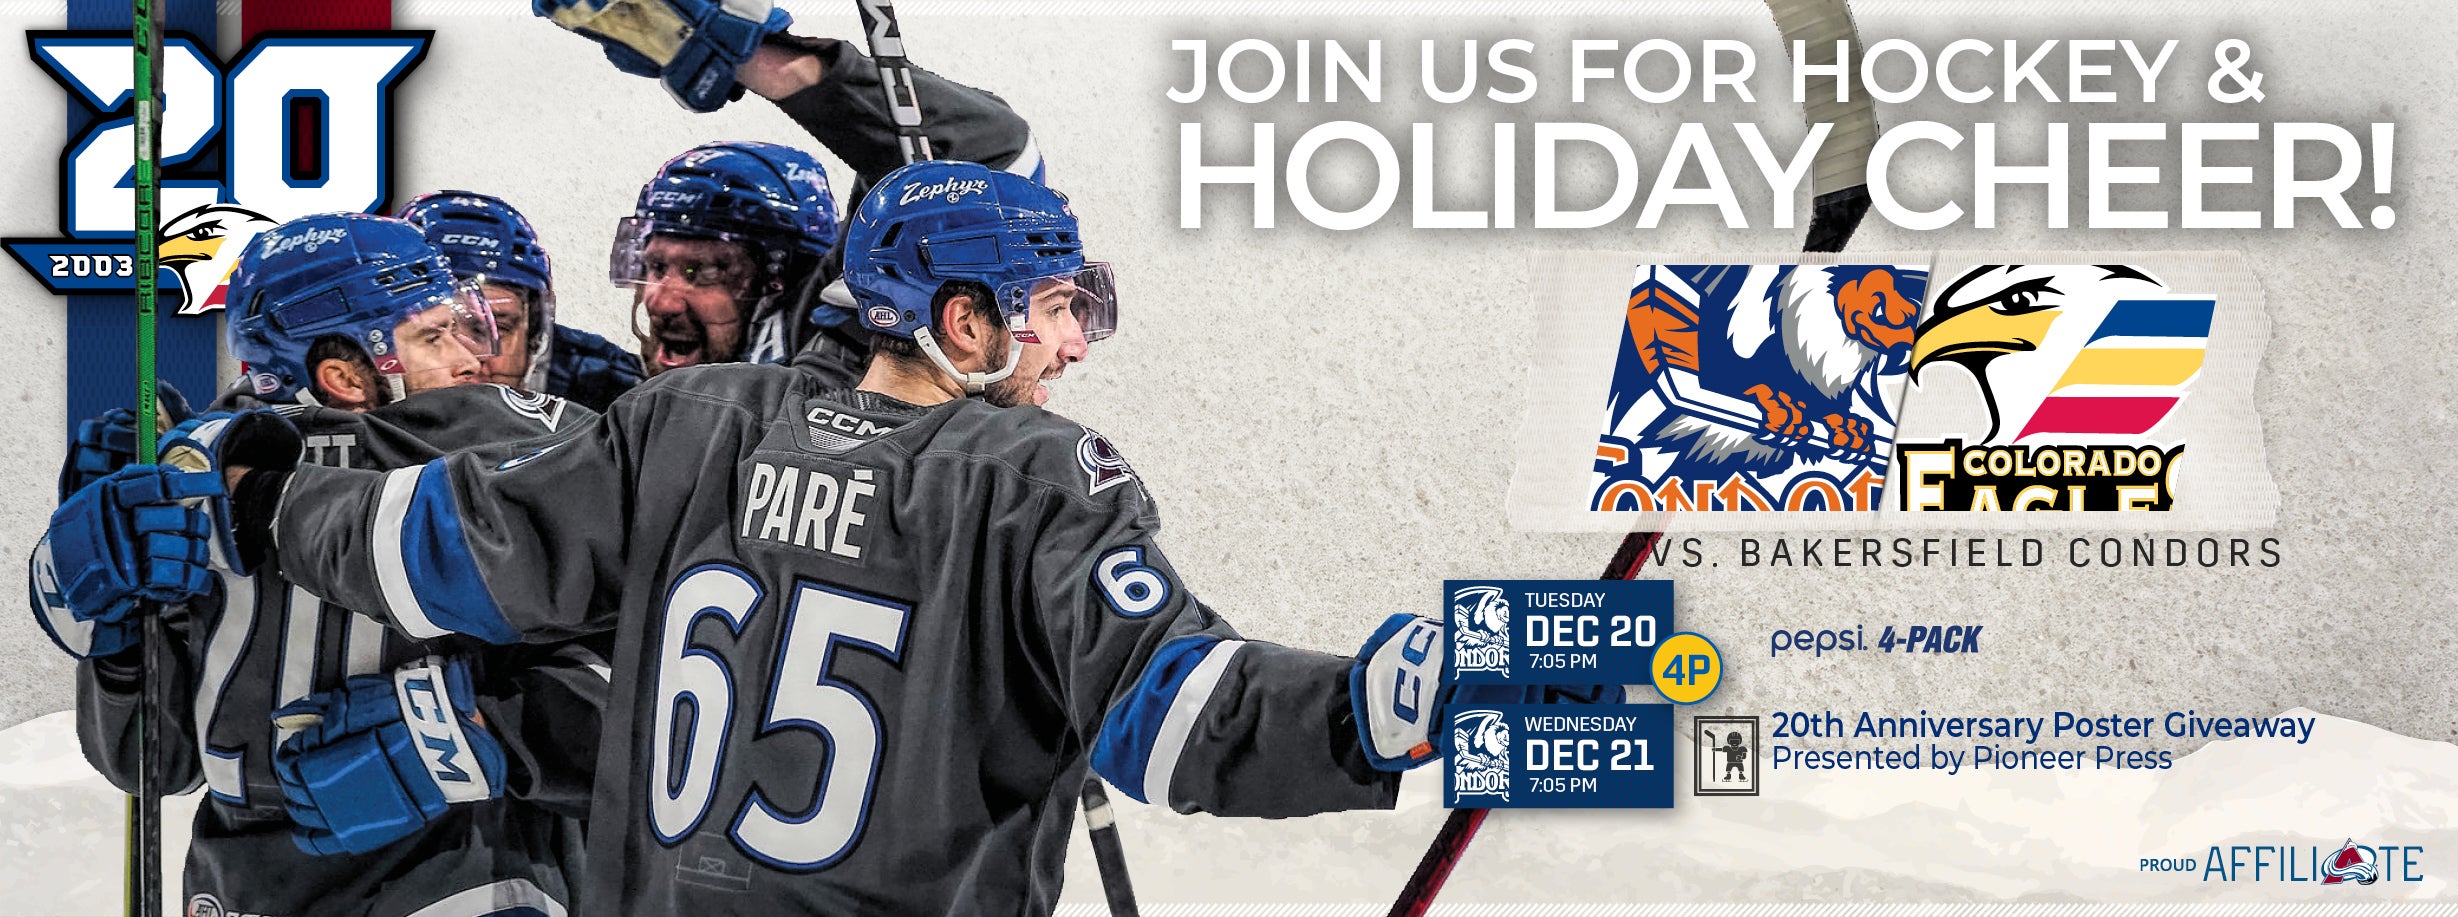 Join us for Hockey and Holiday Cheer this week!